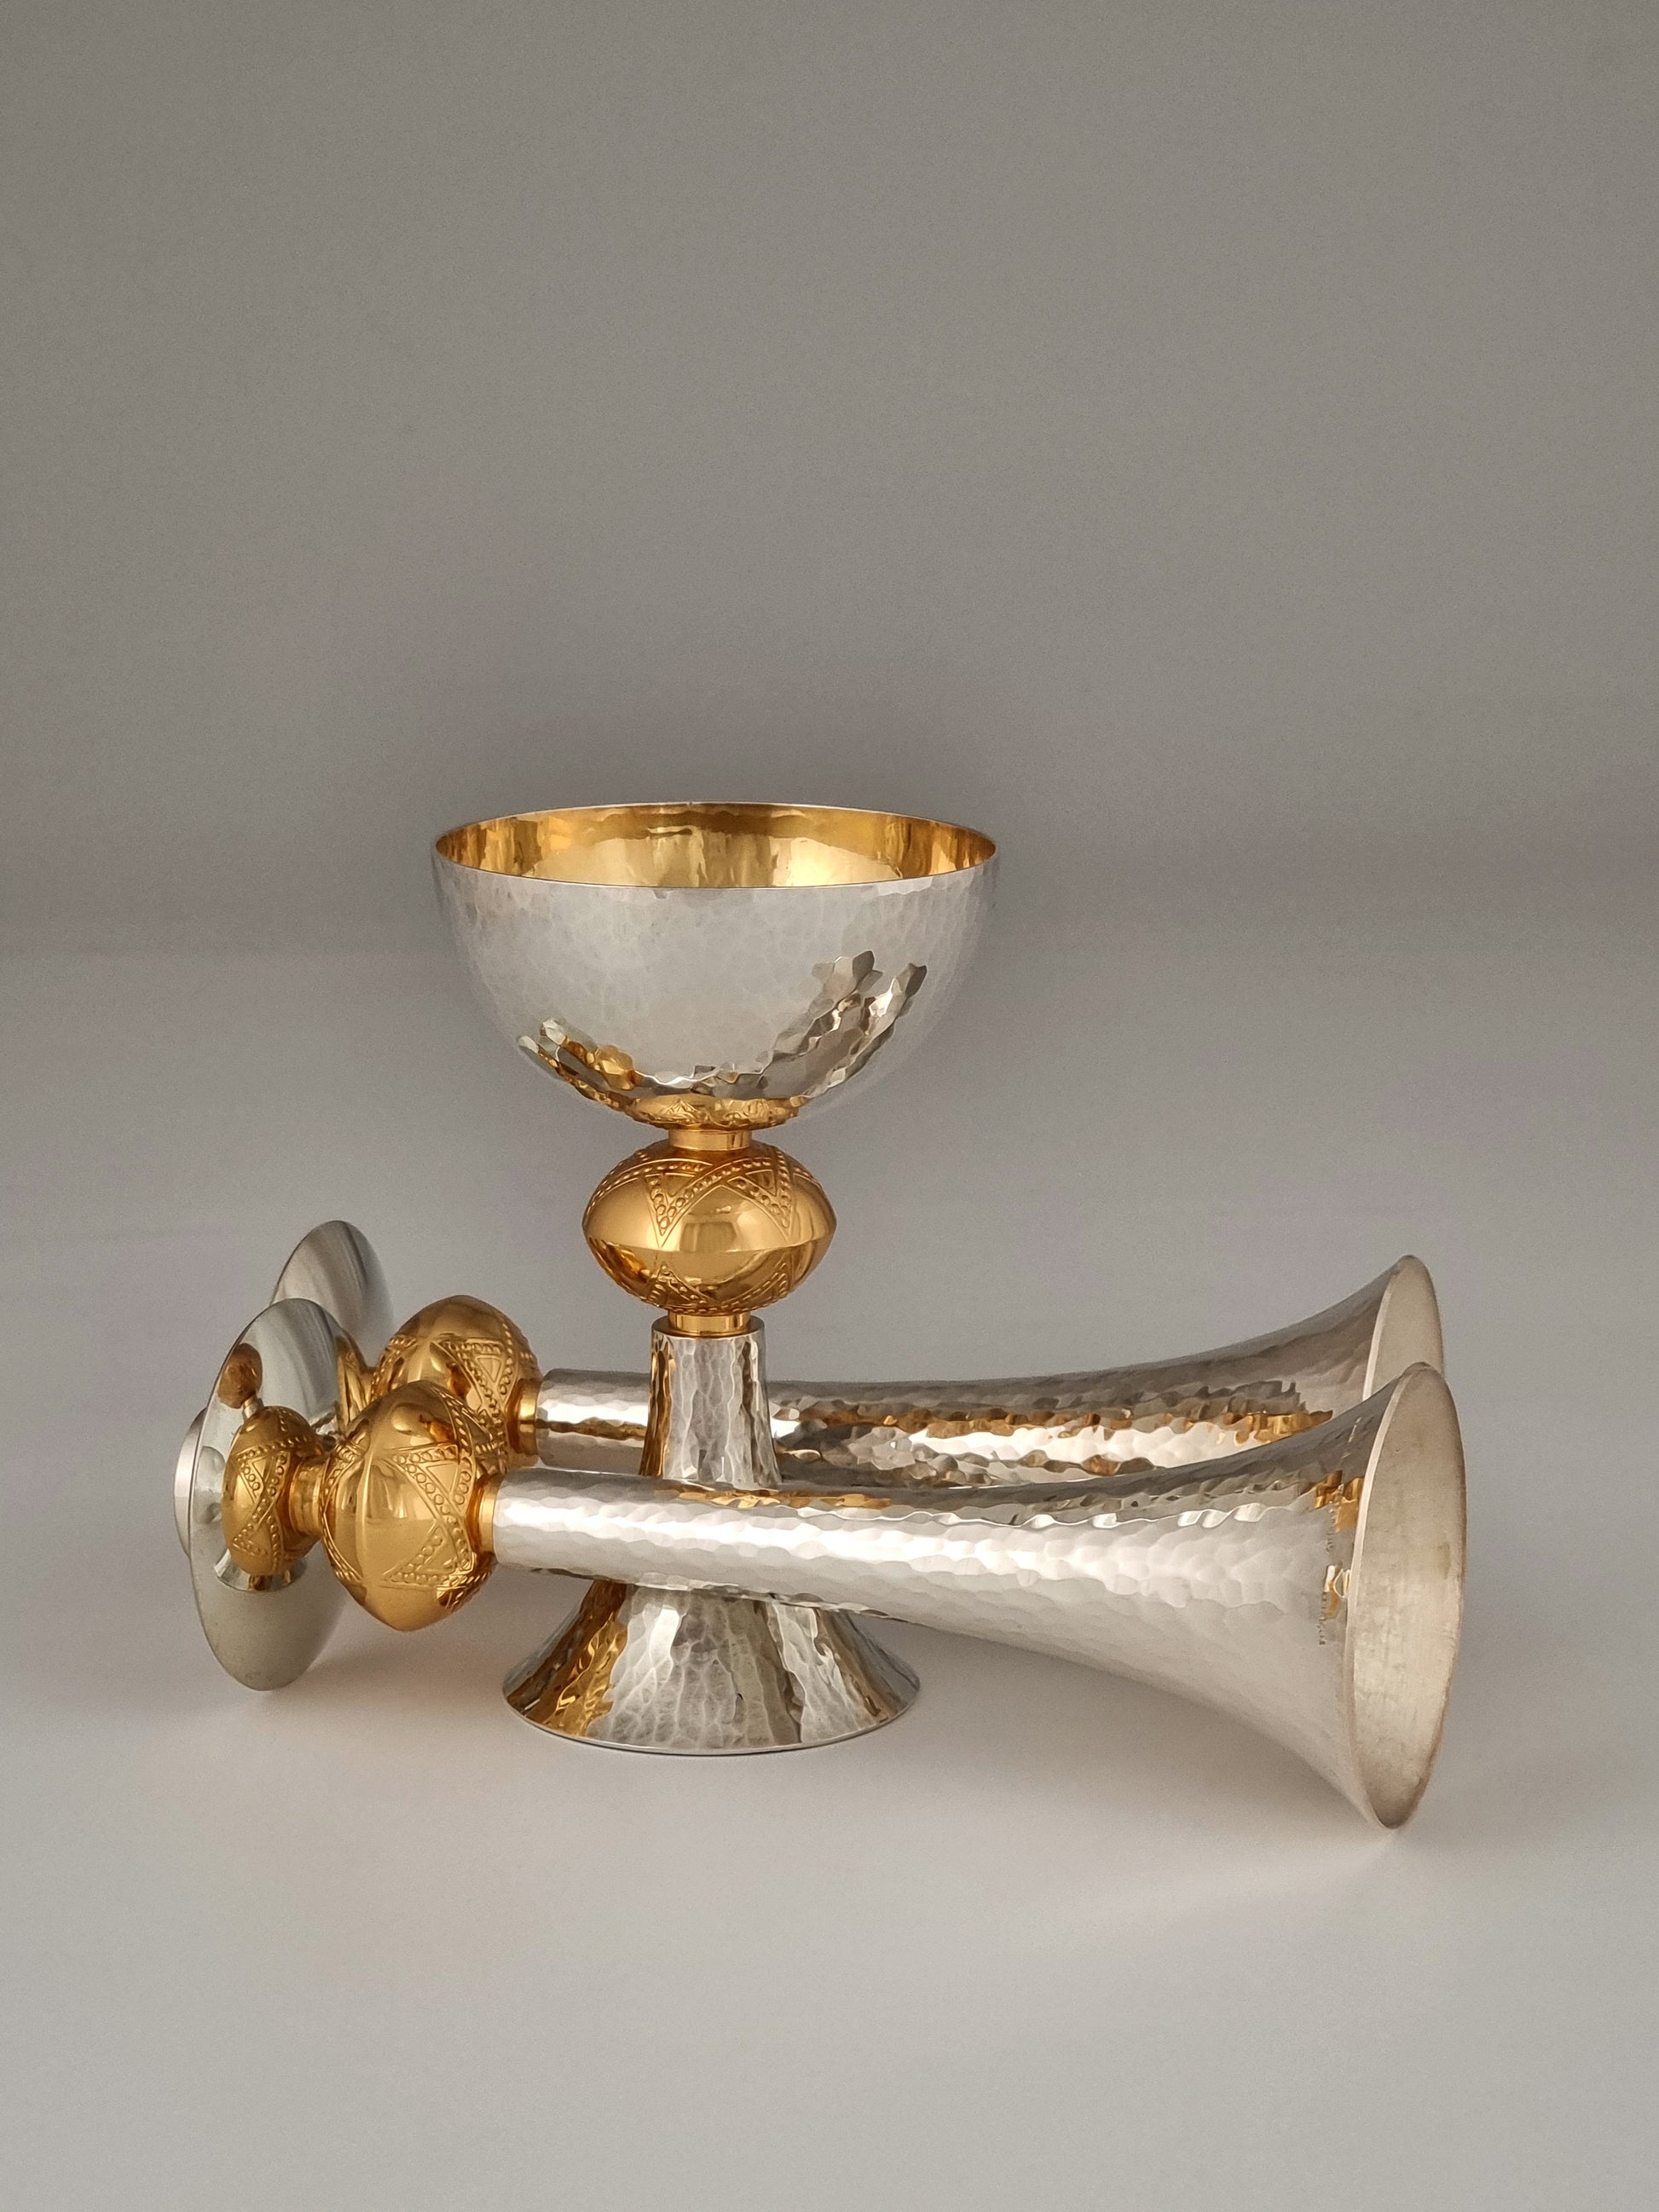 Kiddush cup with a pair of candlesticks, all bearing the star of David